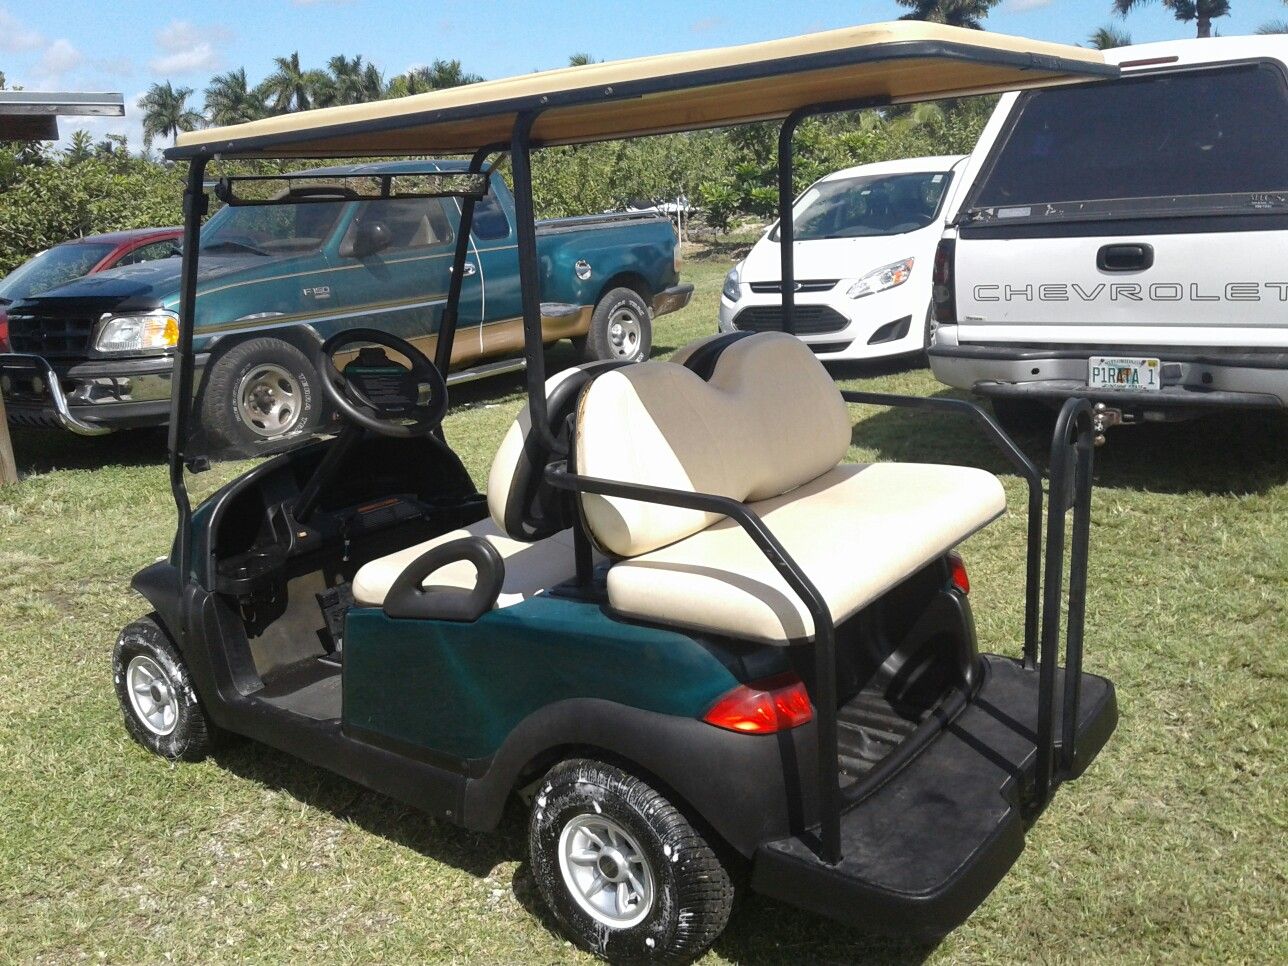 Club car precedent 2008 has one year old batteries lights charger included